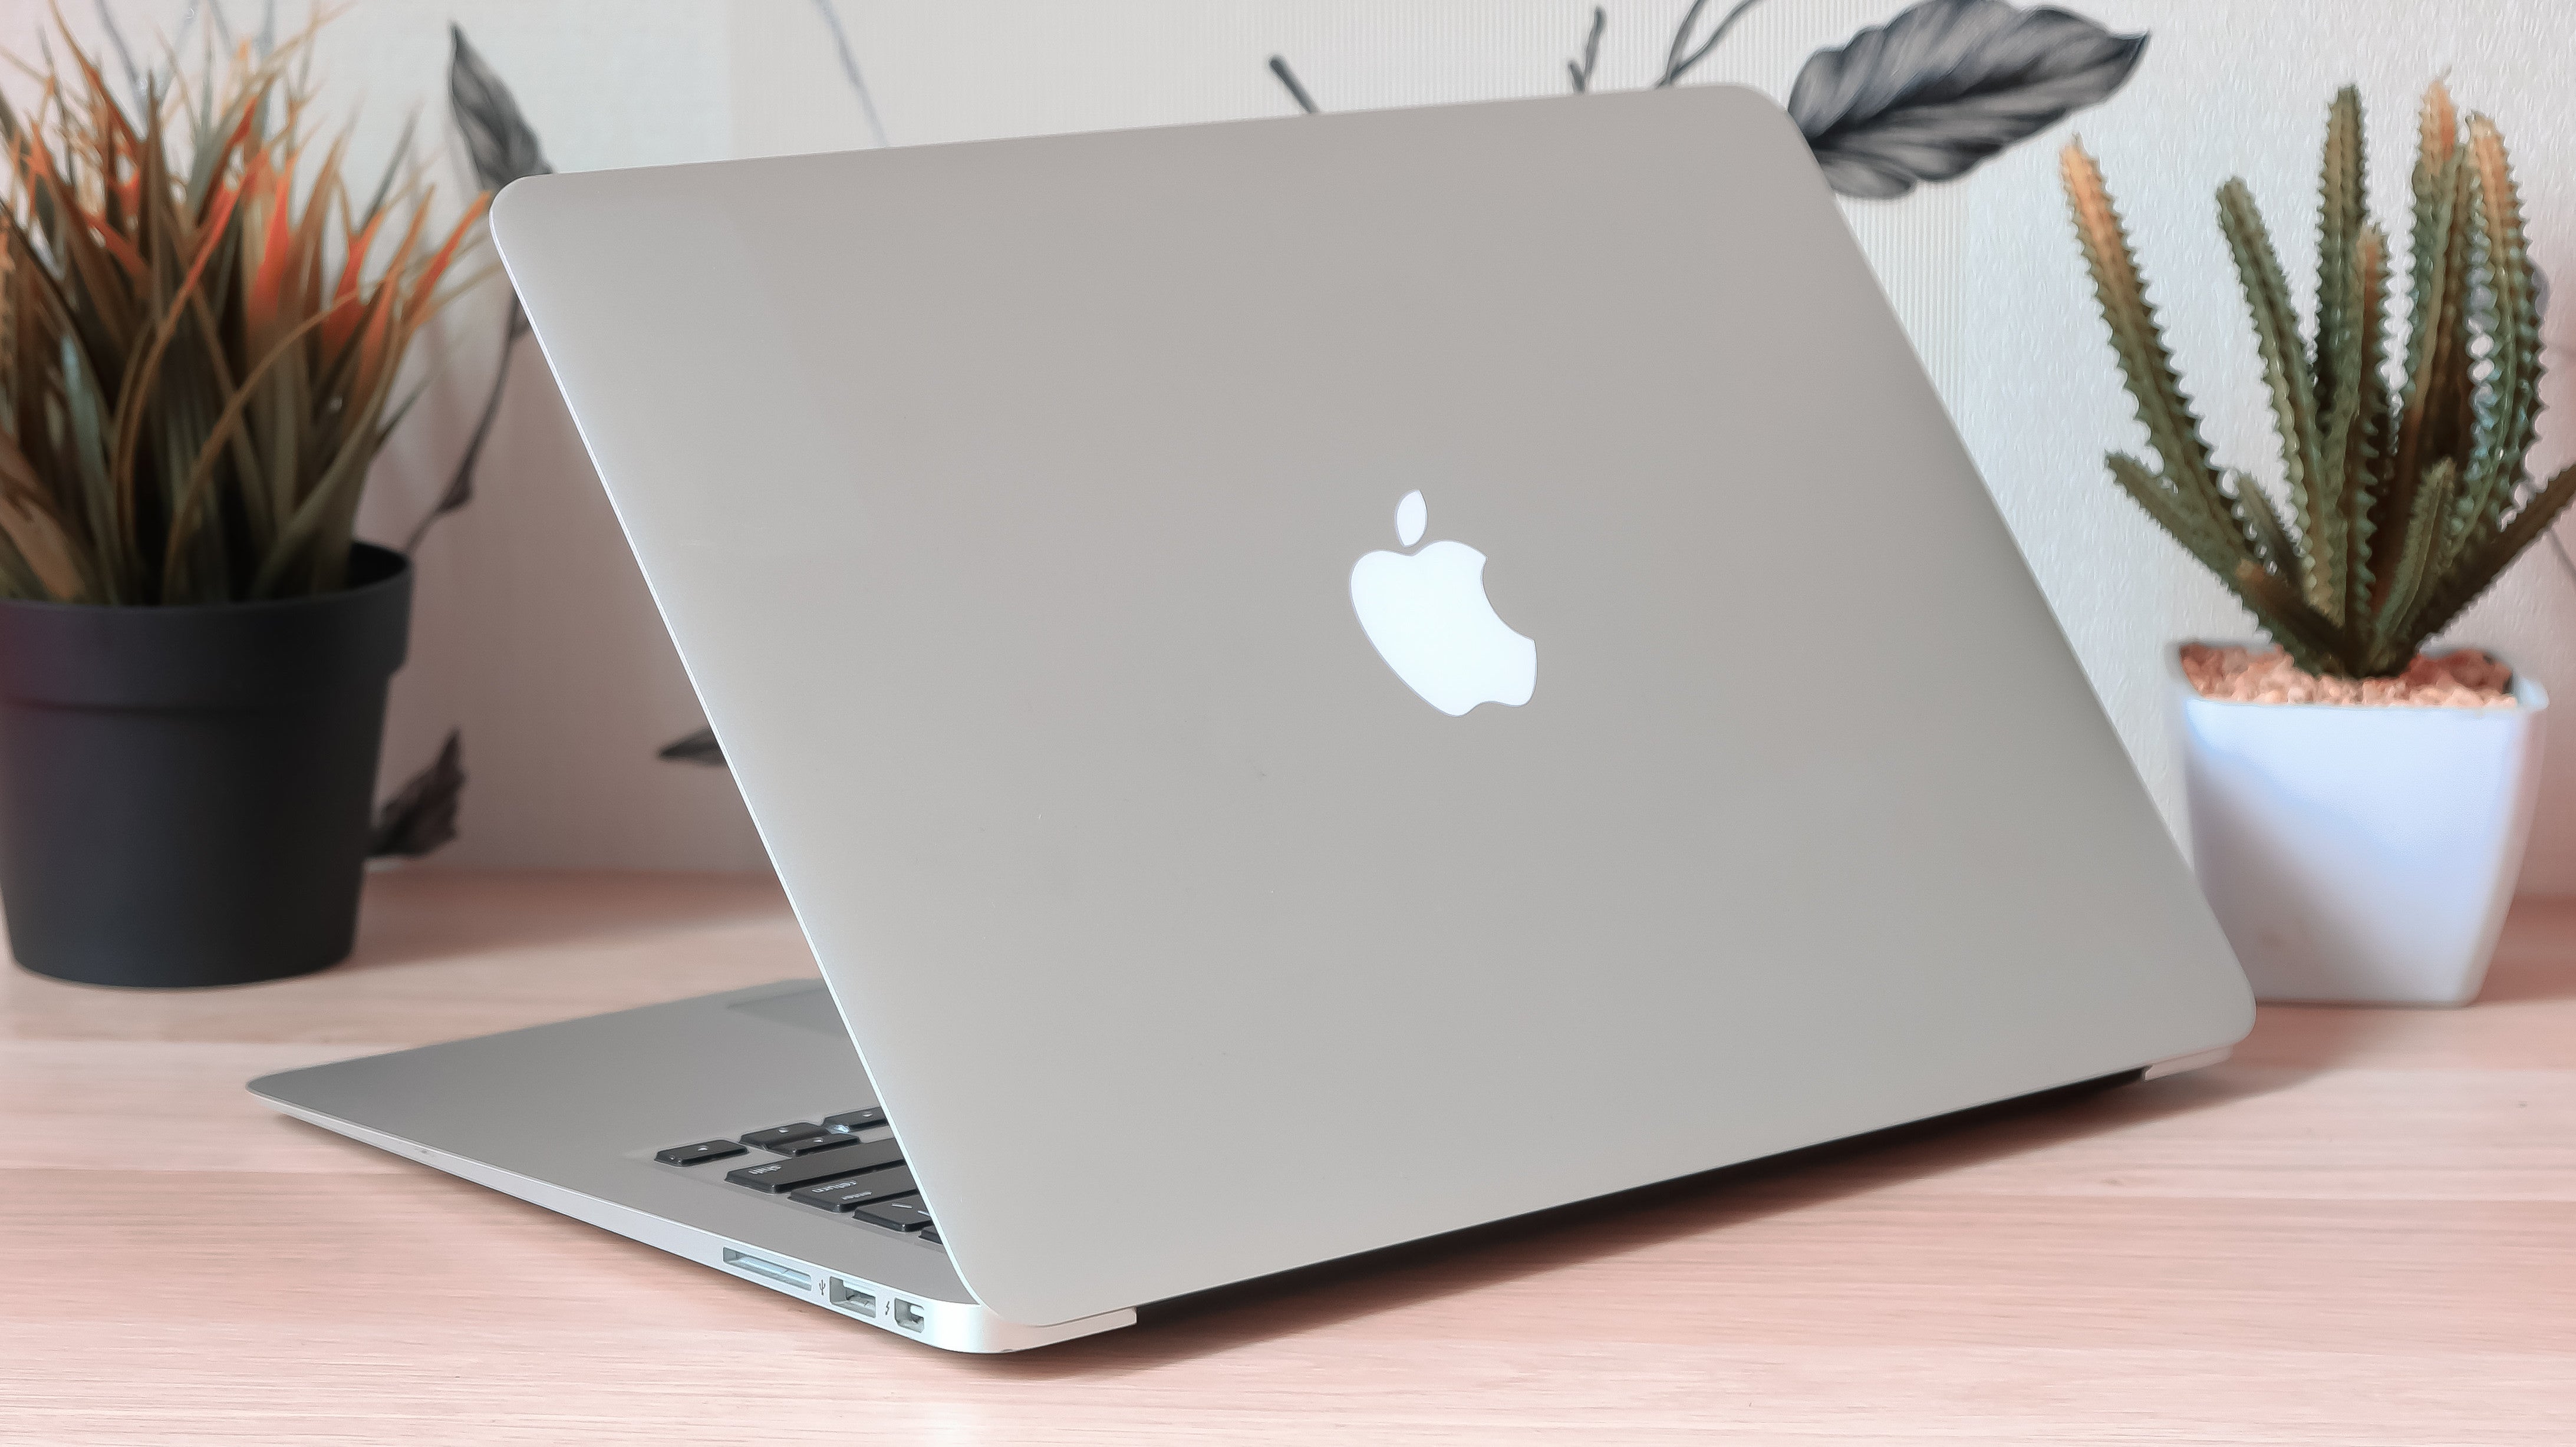 How To Enable The Classic Mac Startup Chime